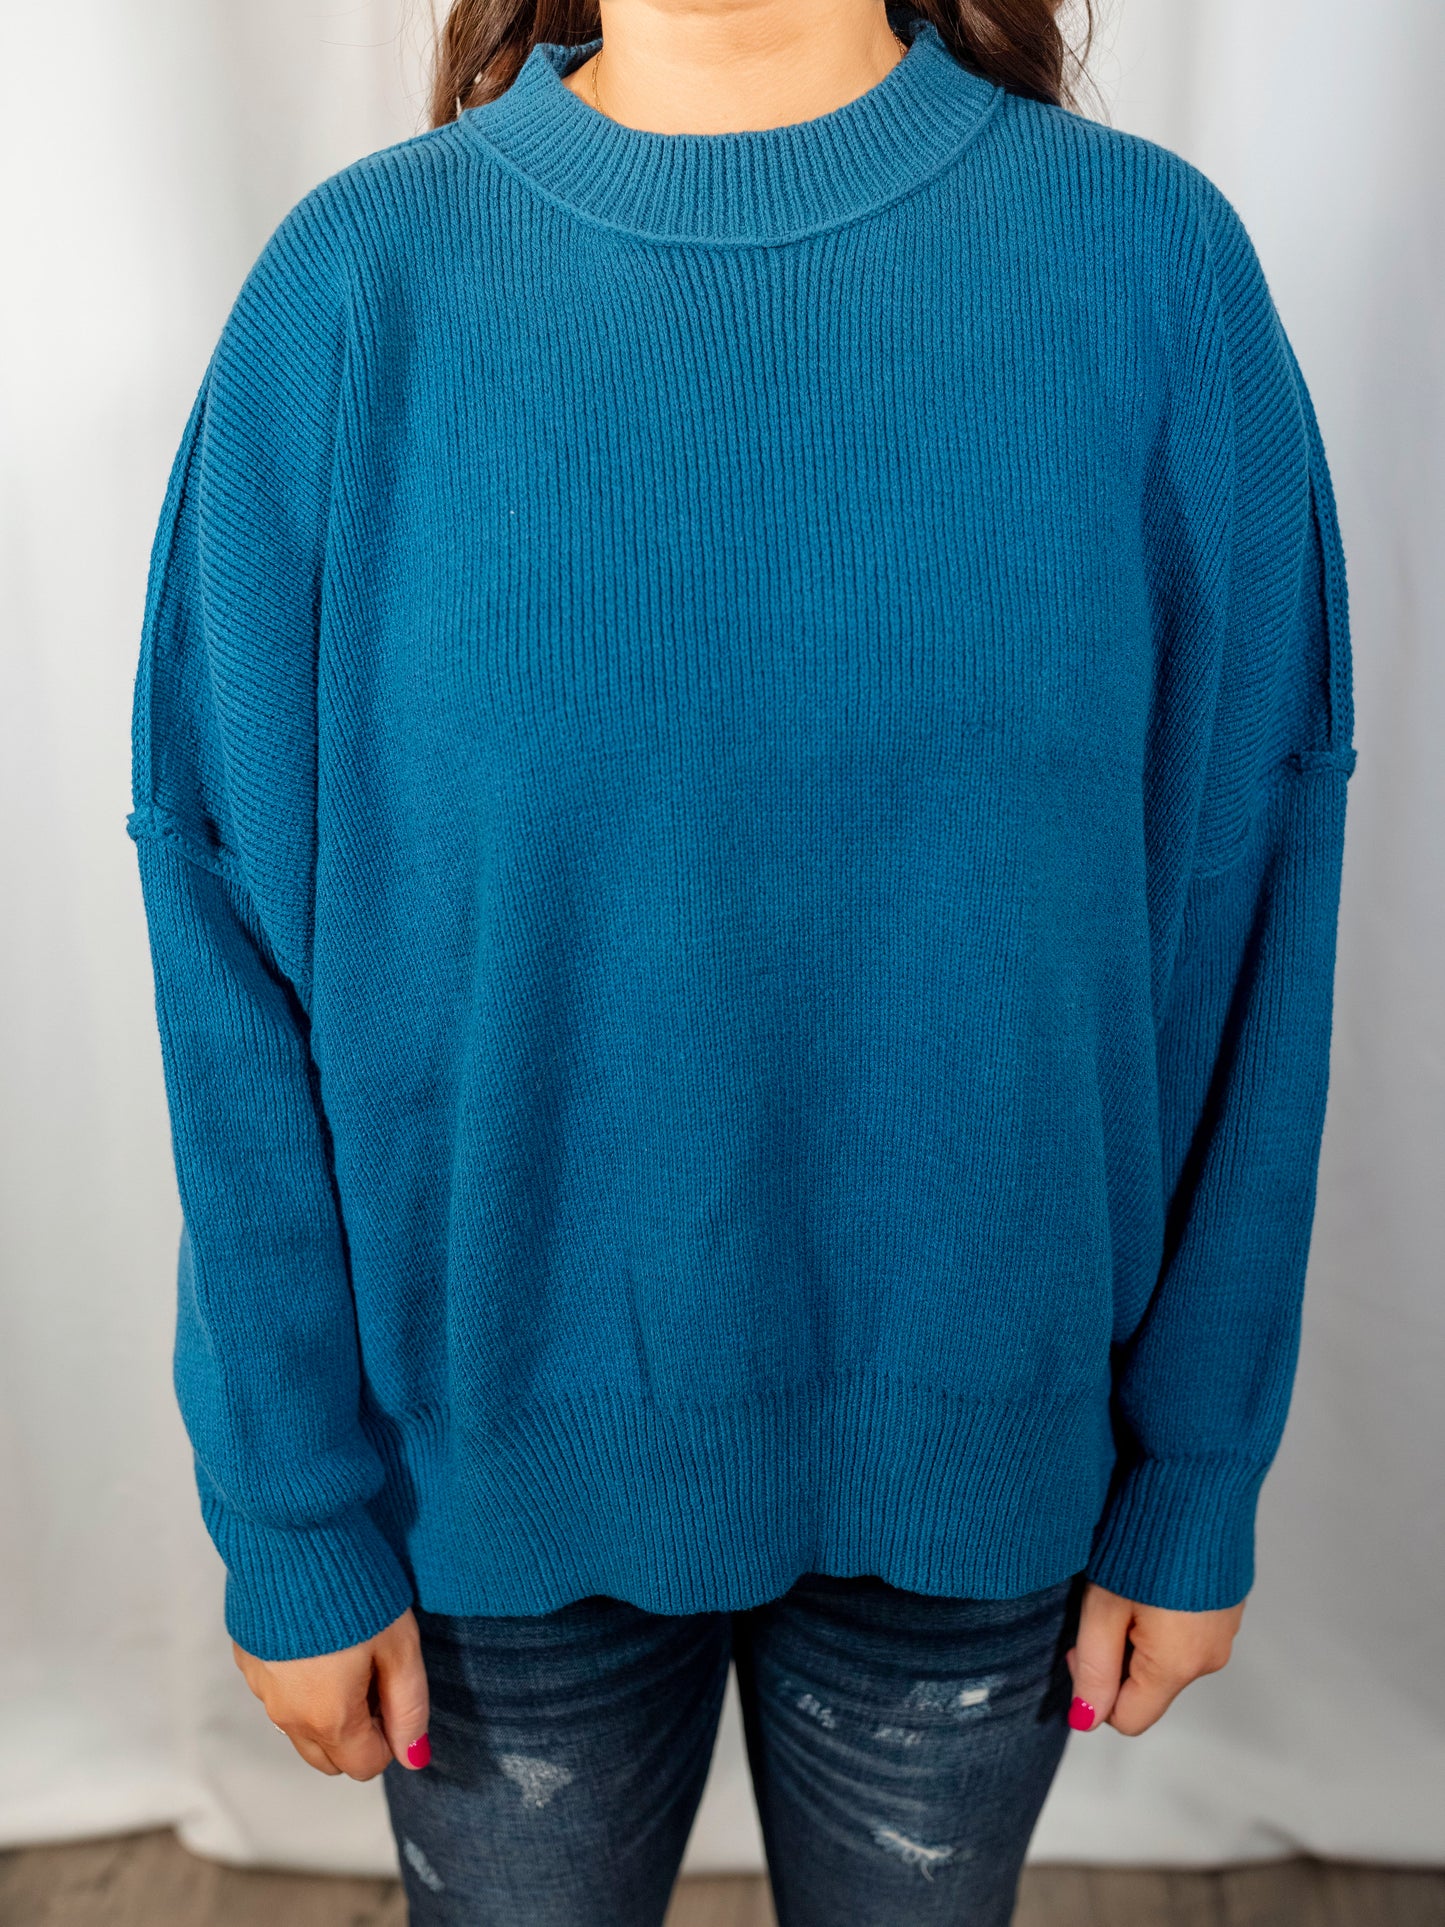 Blue Oversized Free People Dupe Sweater